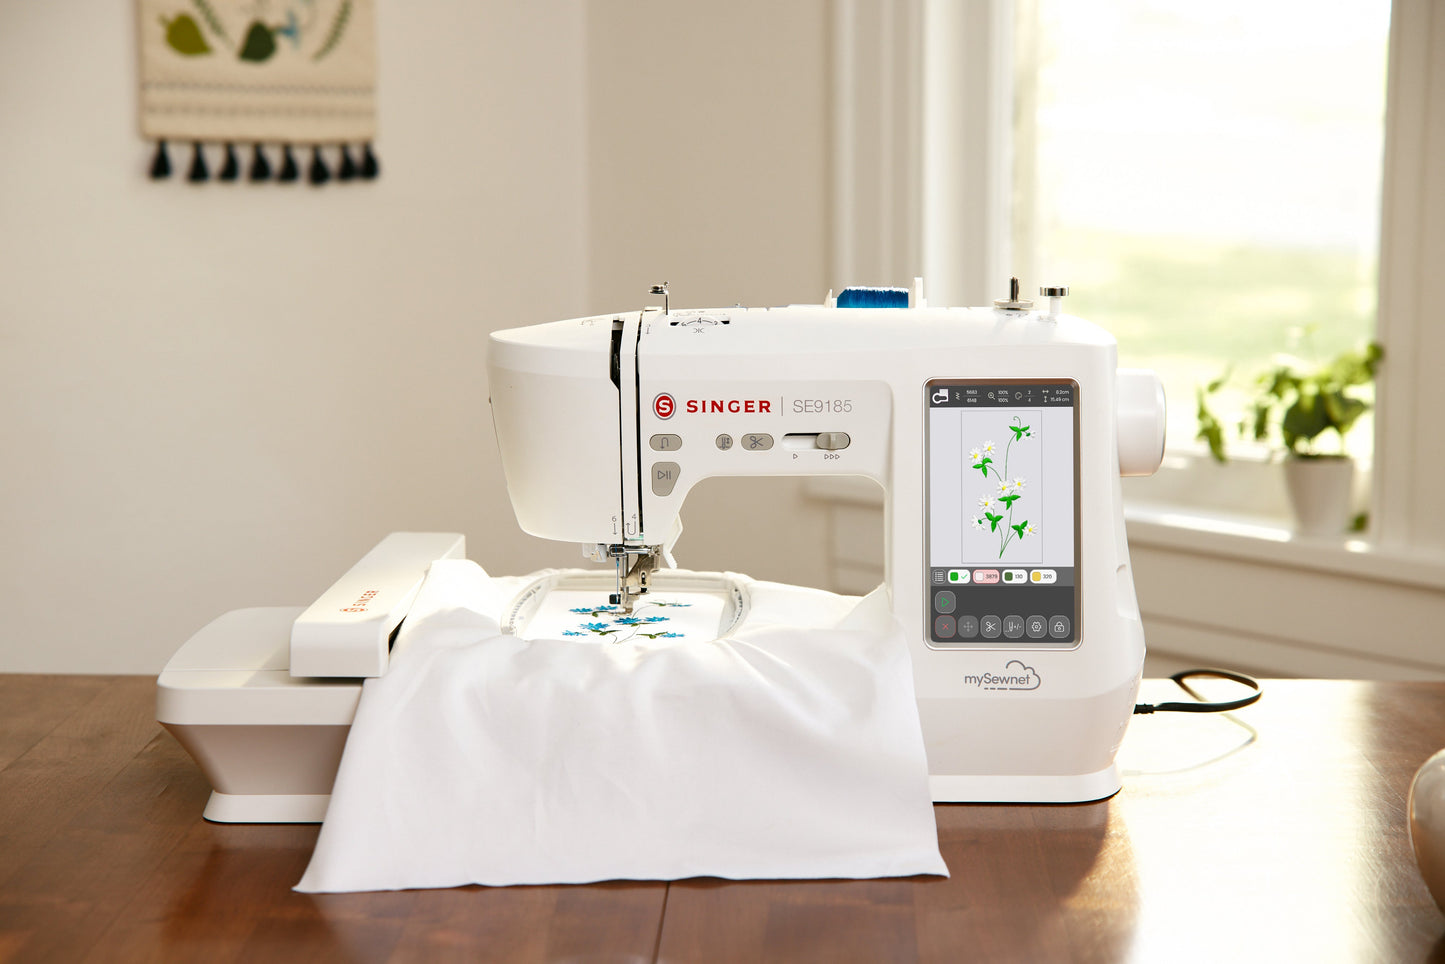 Singer SE9185 Sewing, Quilting and Embroidery machine with WIFI, colour touchscreen. Ex Display / Ex Demo machine